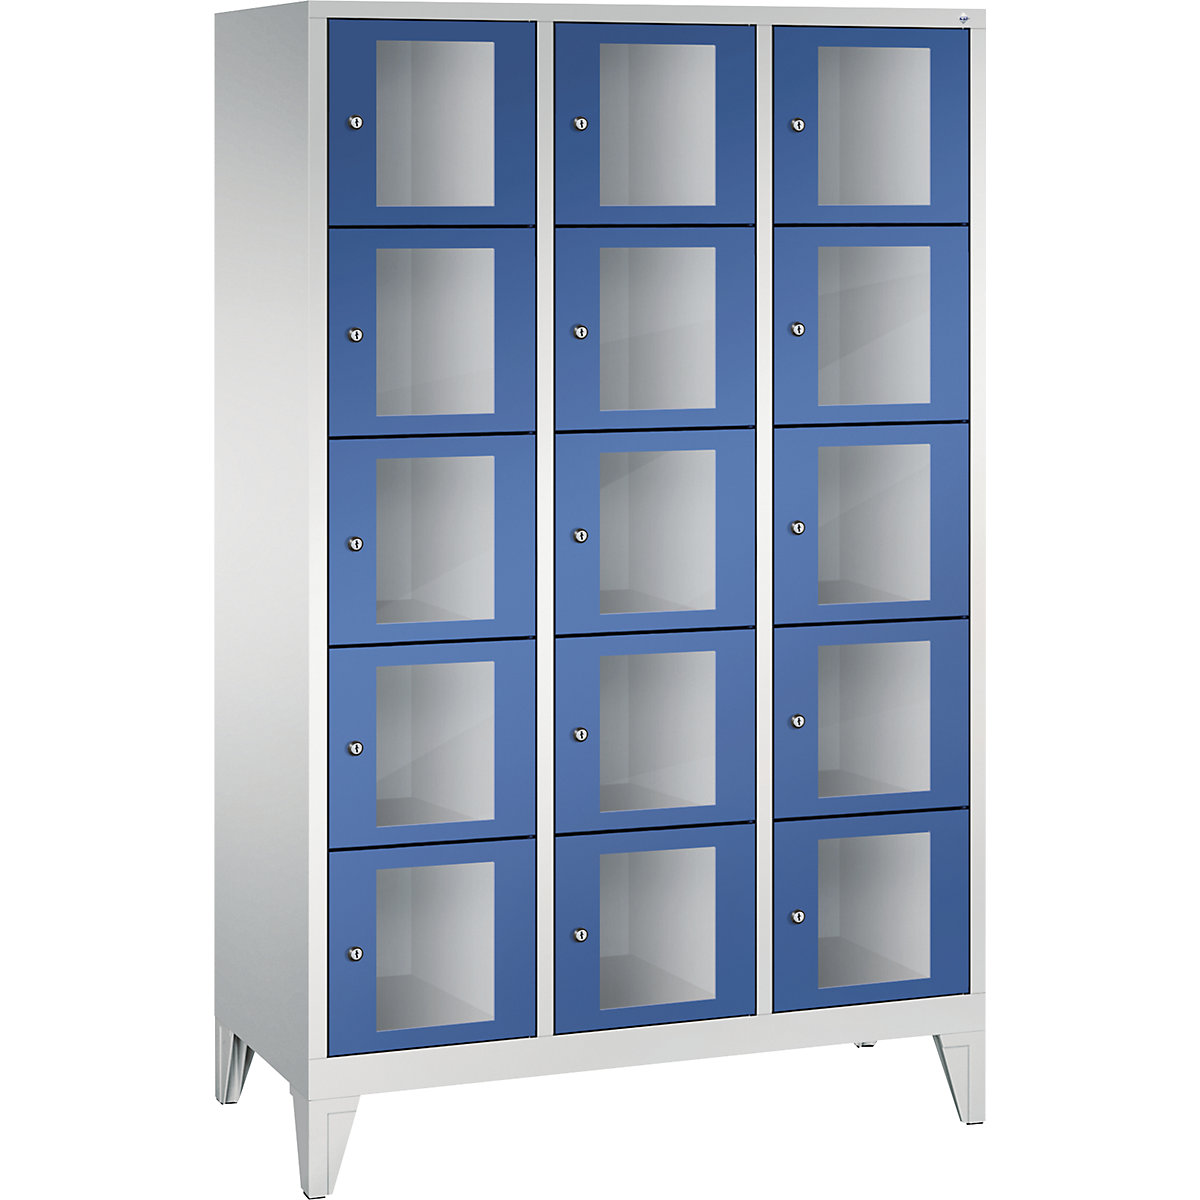 CLASSIC locker unit, compartment height 295 mm, with feet – C+P, 15 compartments, width 1200 mm, gentian blue door